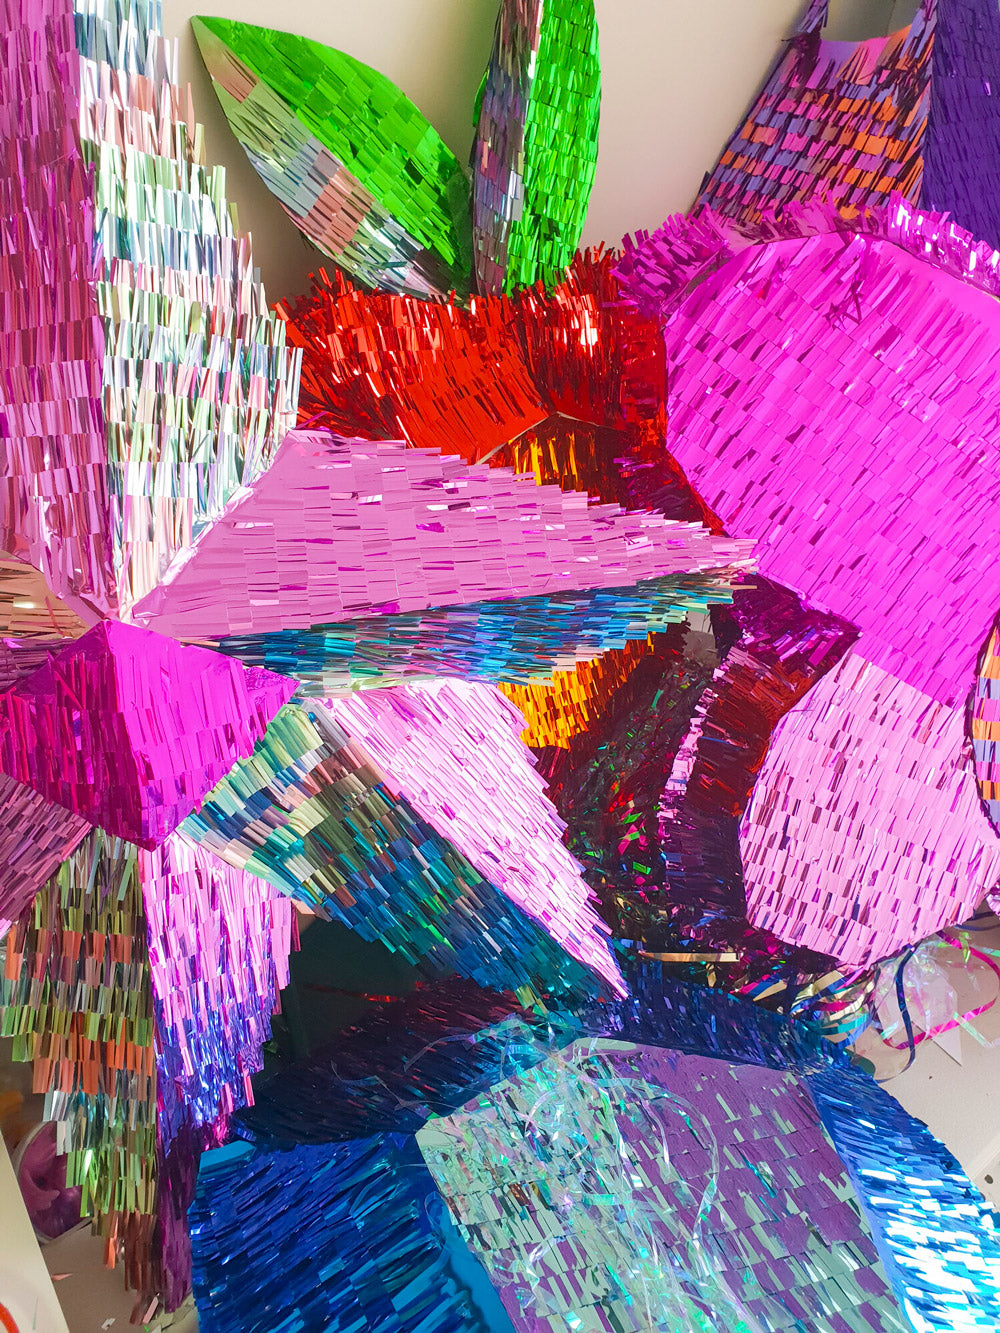 A close up photo of a collection of handmade metallic piñatas in rainbow colours.